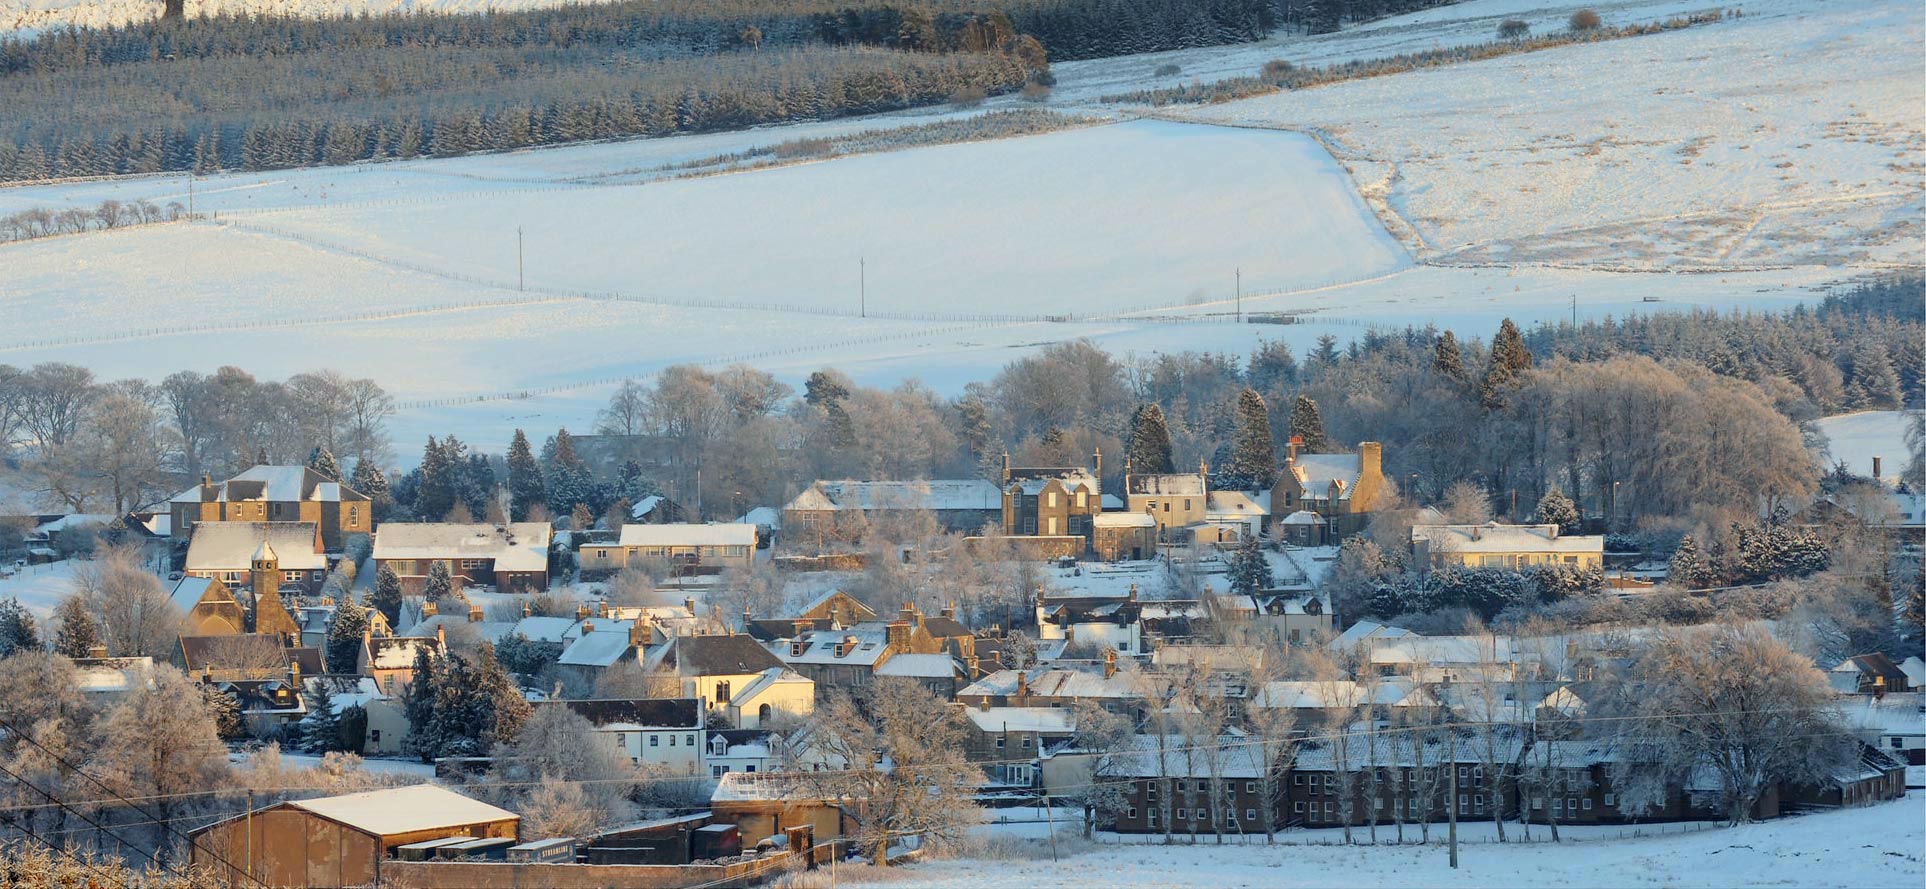 Douglas in snow, scenic overview of the village